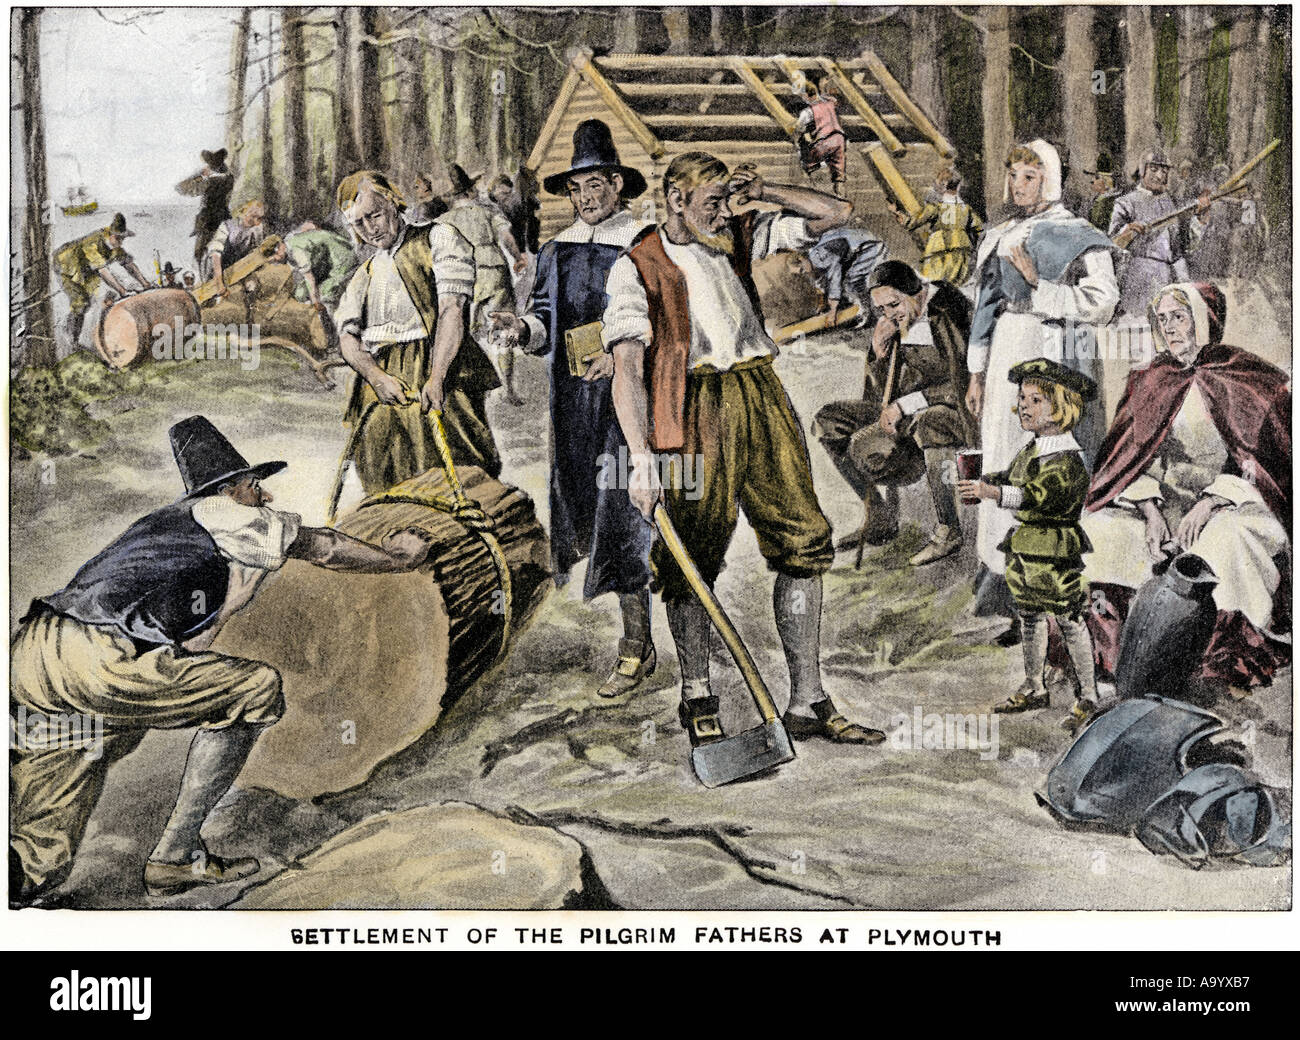 Pilgrims cutting forests and building houses at Plymouth Colony. Hand-colored halftone of an illustration Stock Photo